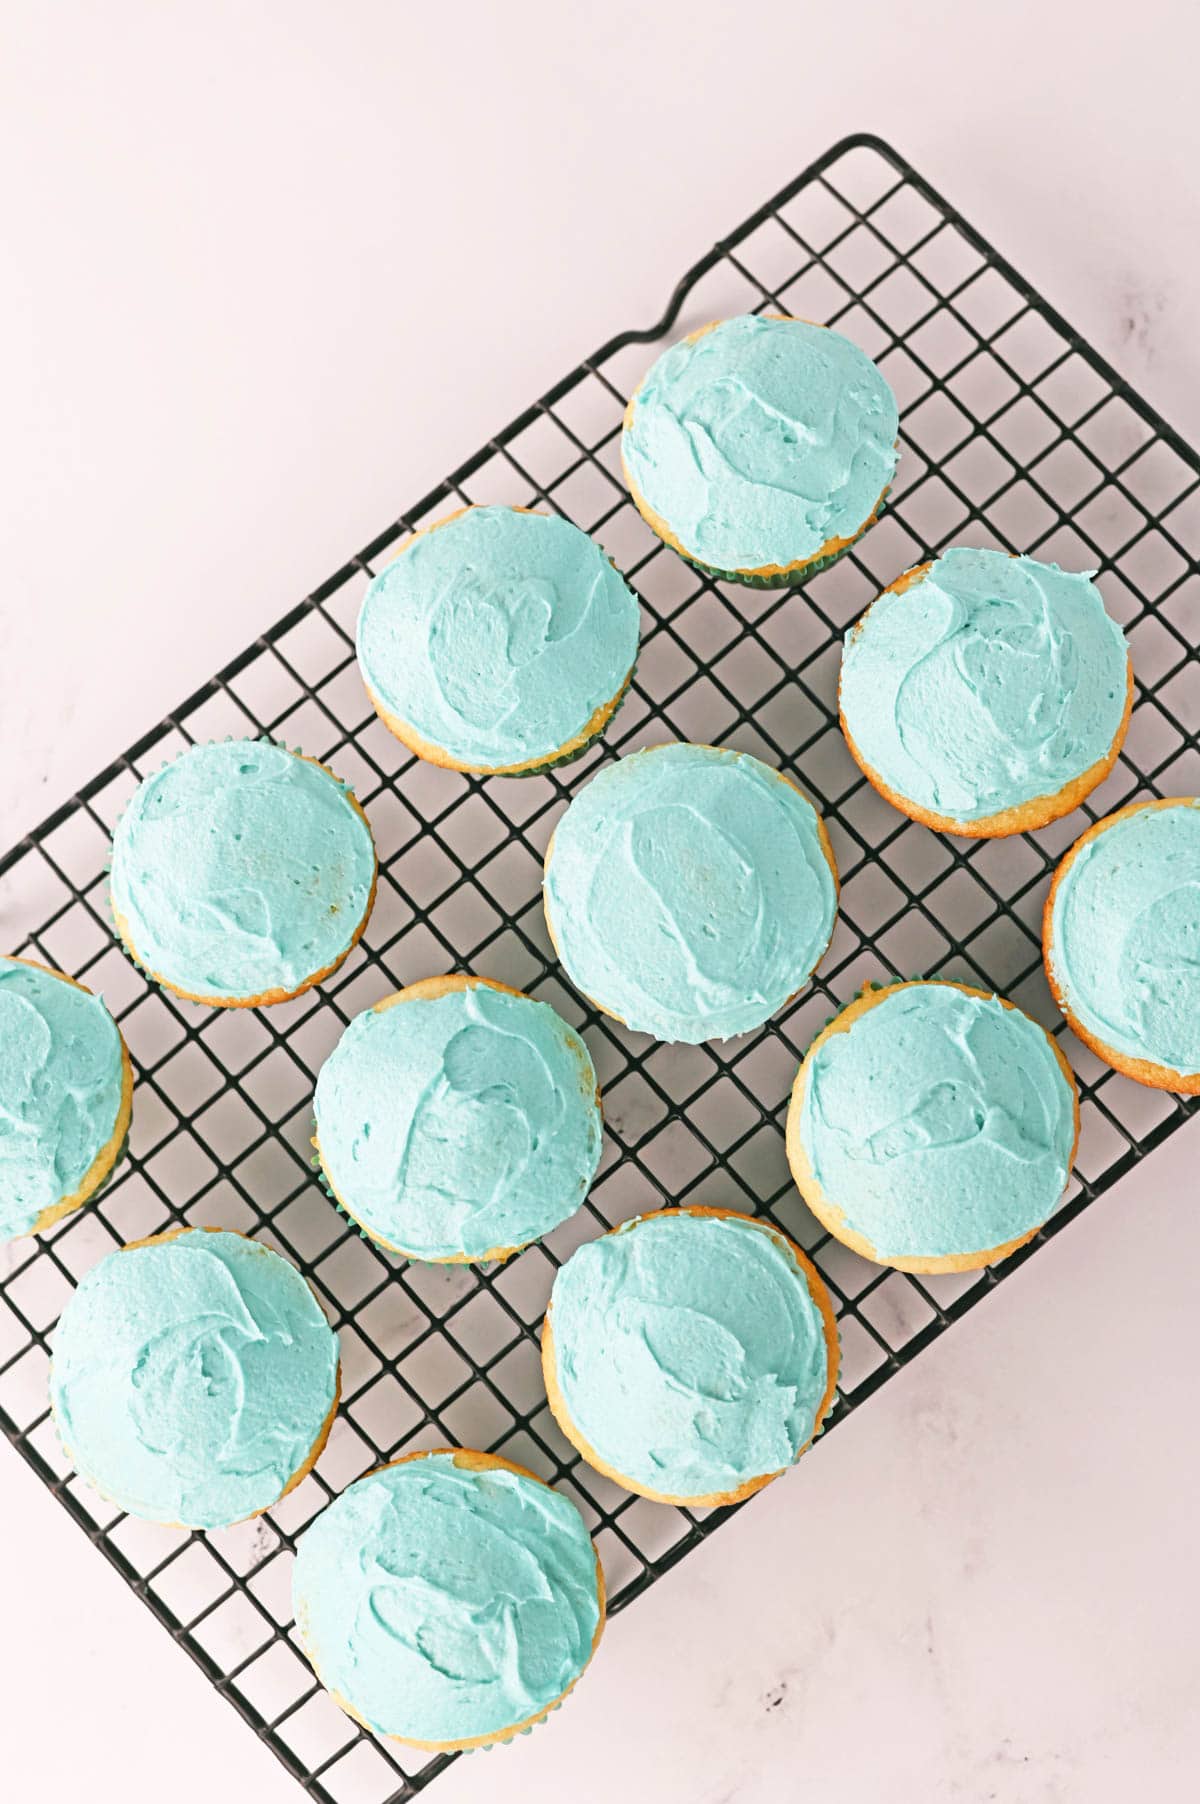 Blue icing on cupcakes